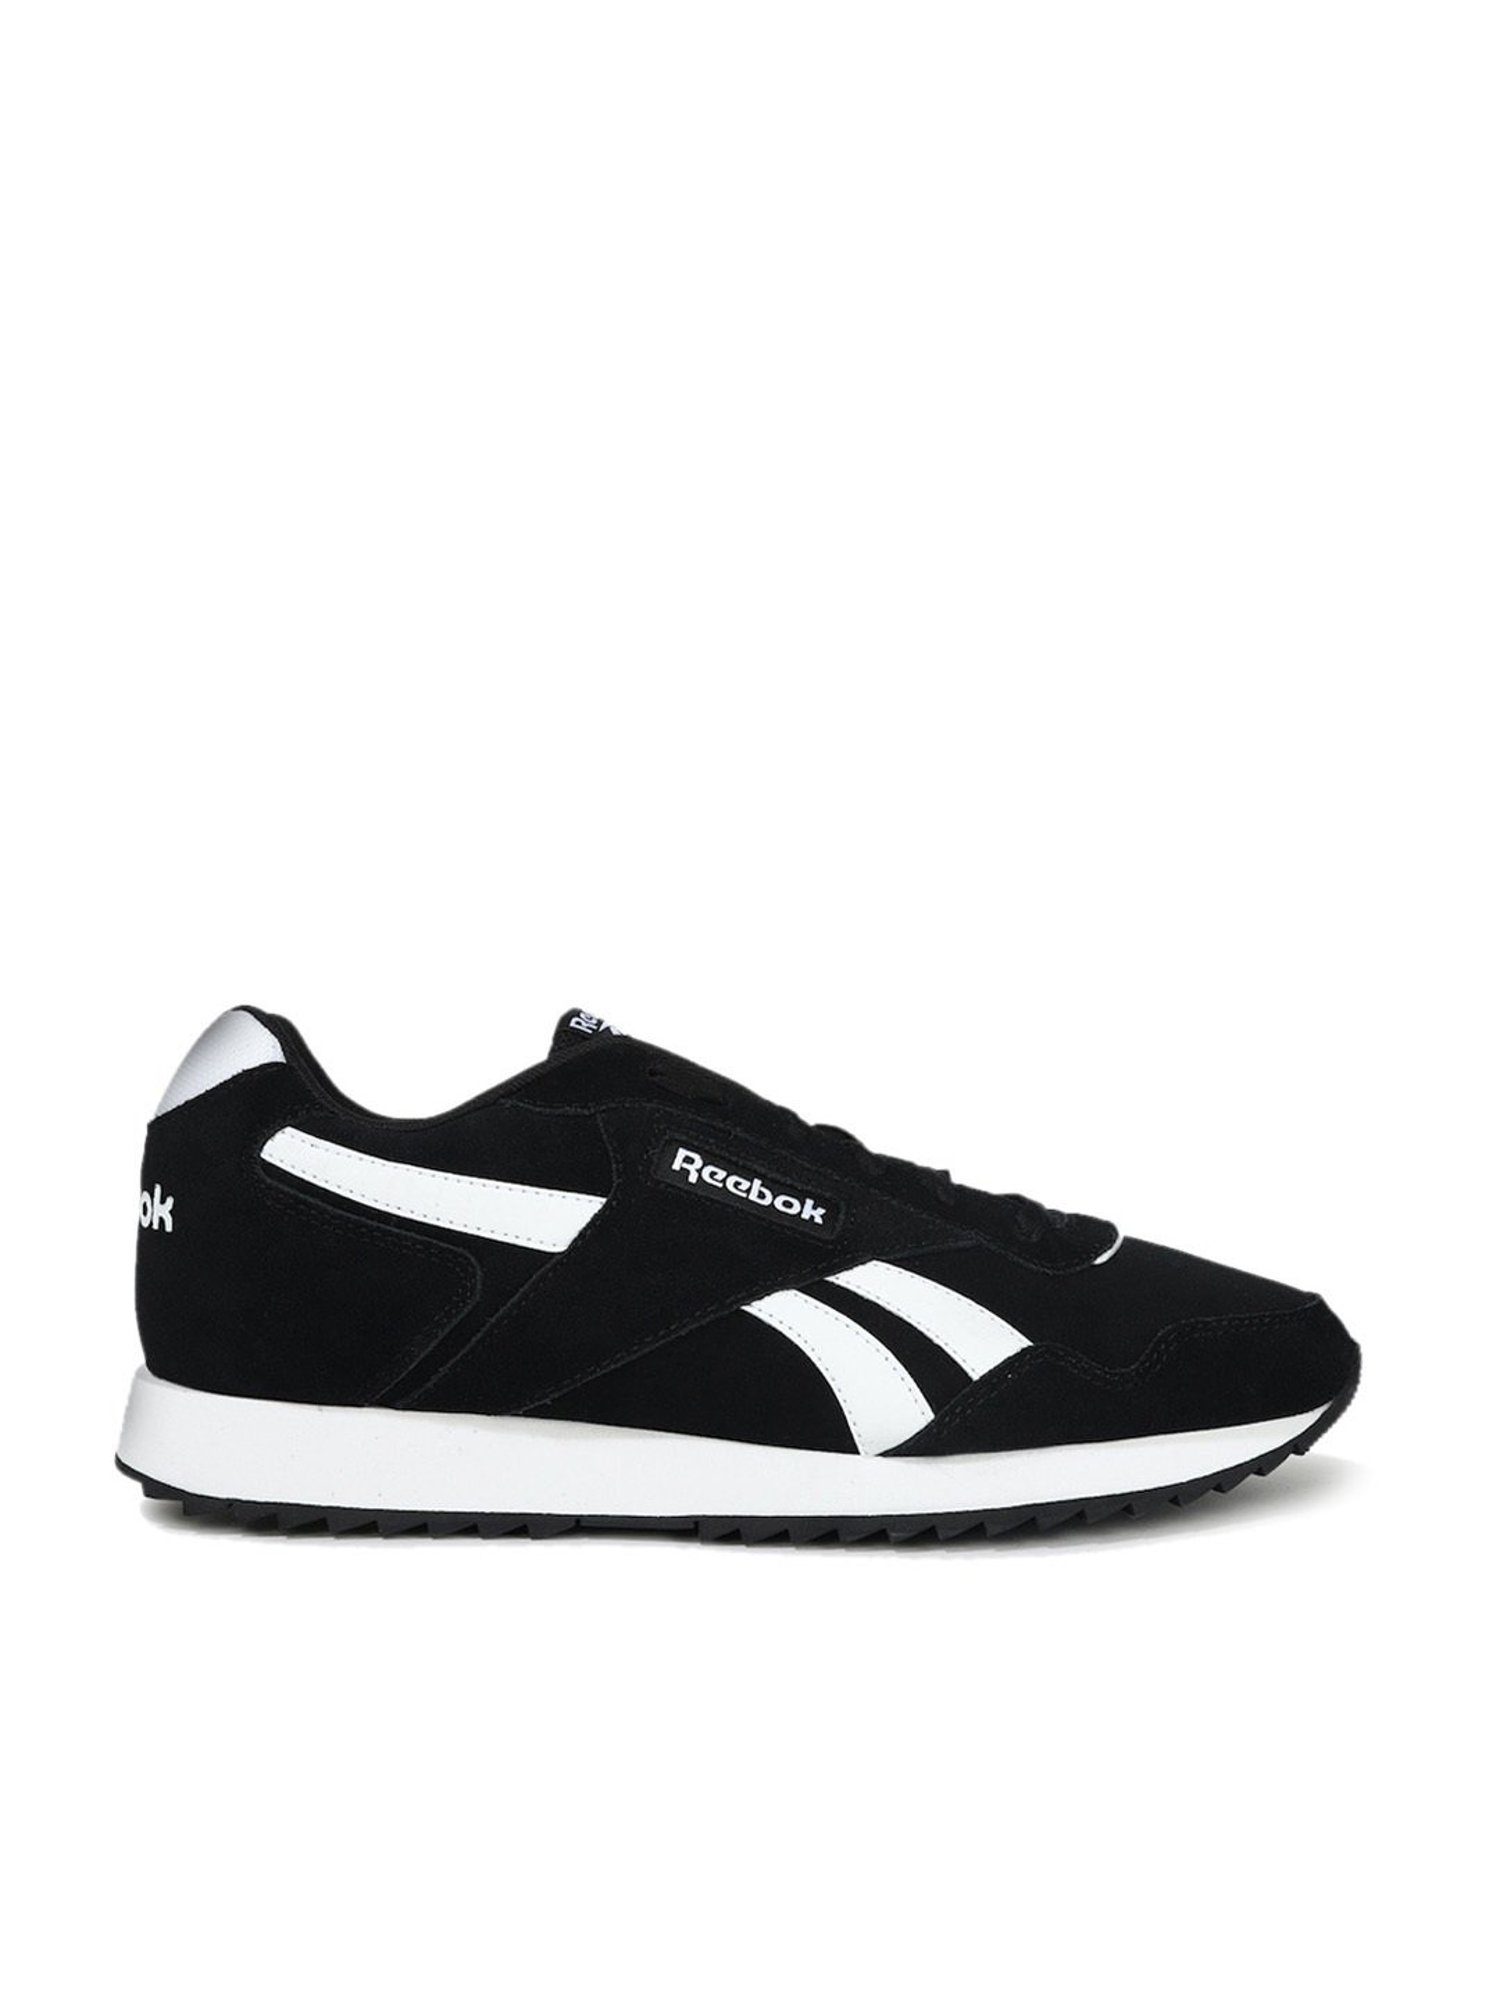 Buy Glide Ripple Black Casual Sneakers for Men at Best Price @ Tata CLiQ